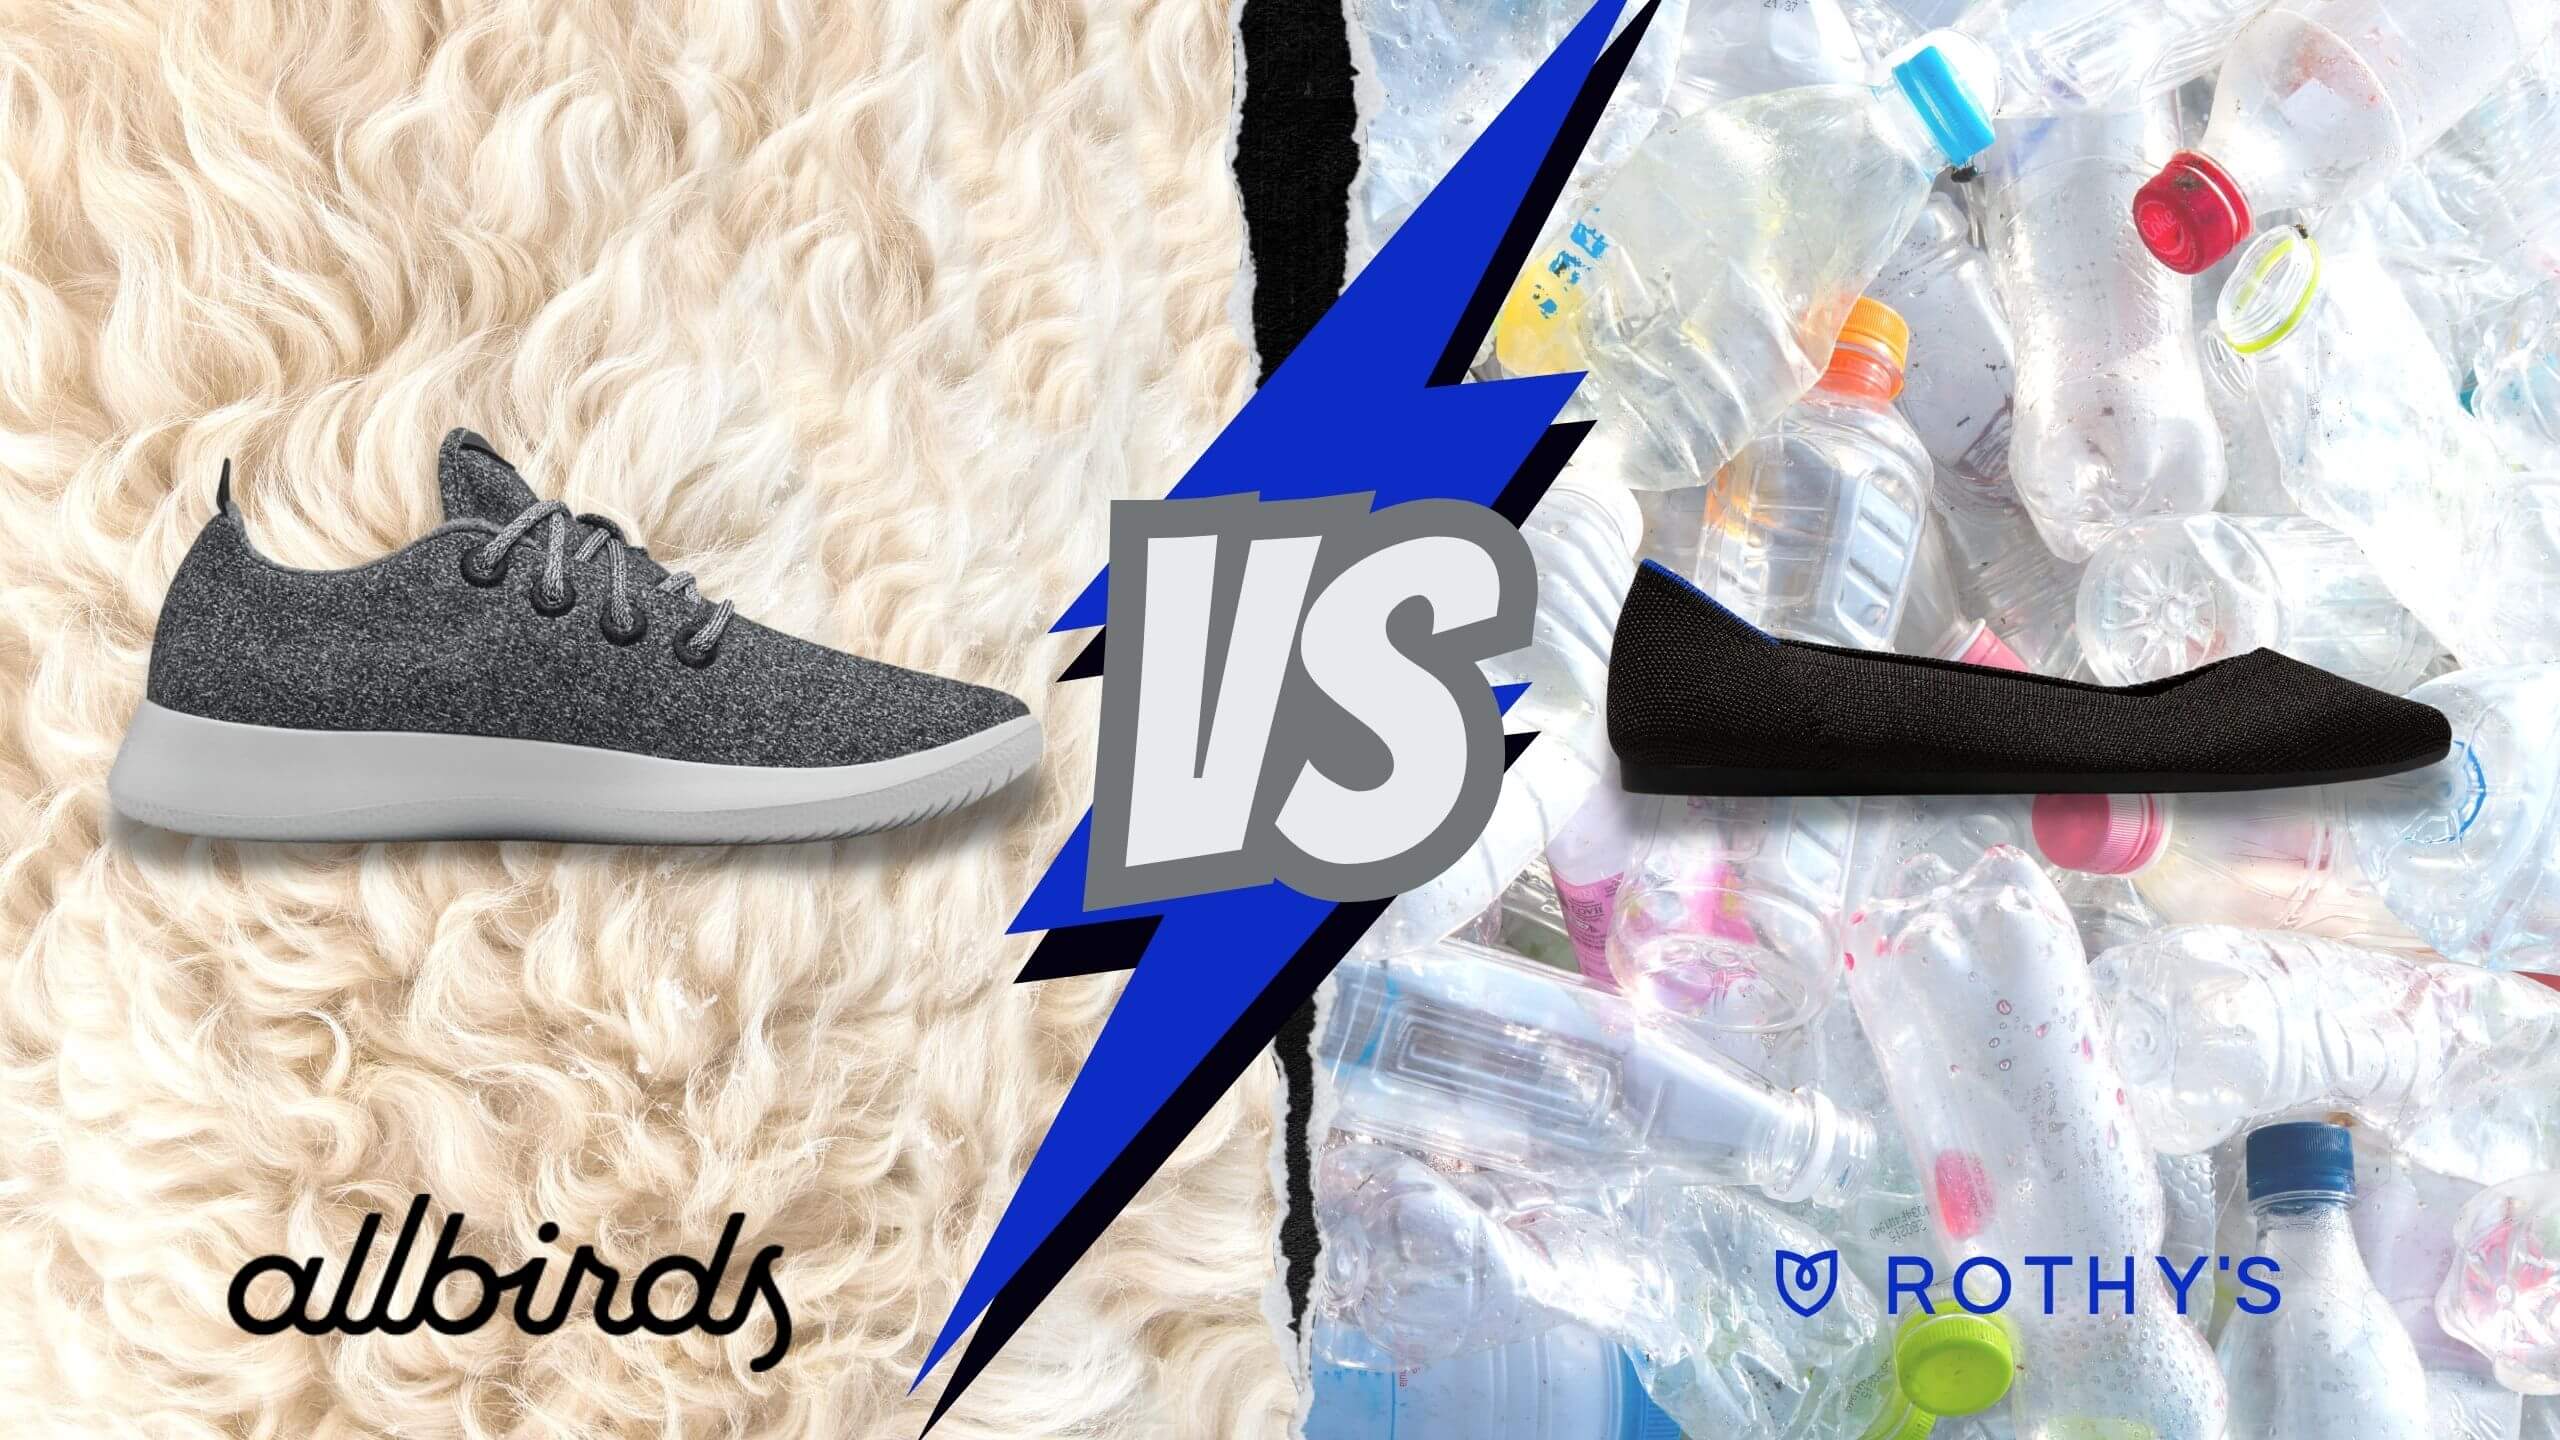 Allbirds vs Rothy's - which one is better?